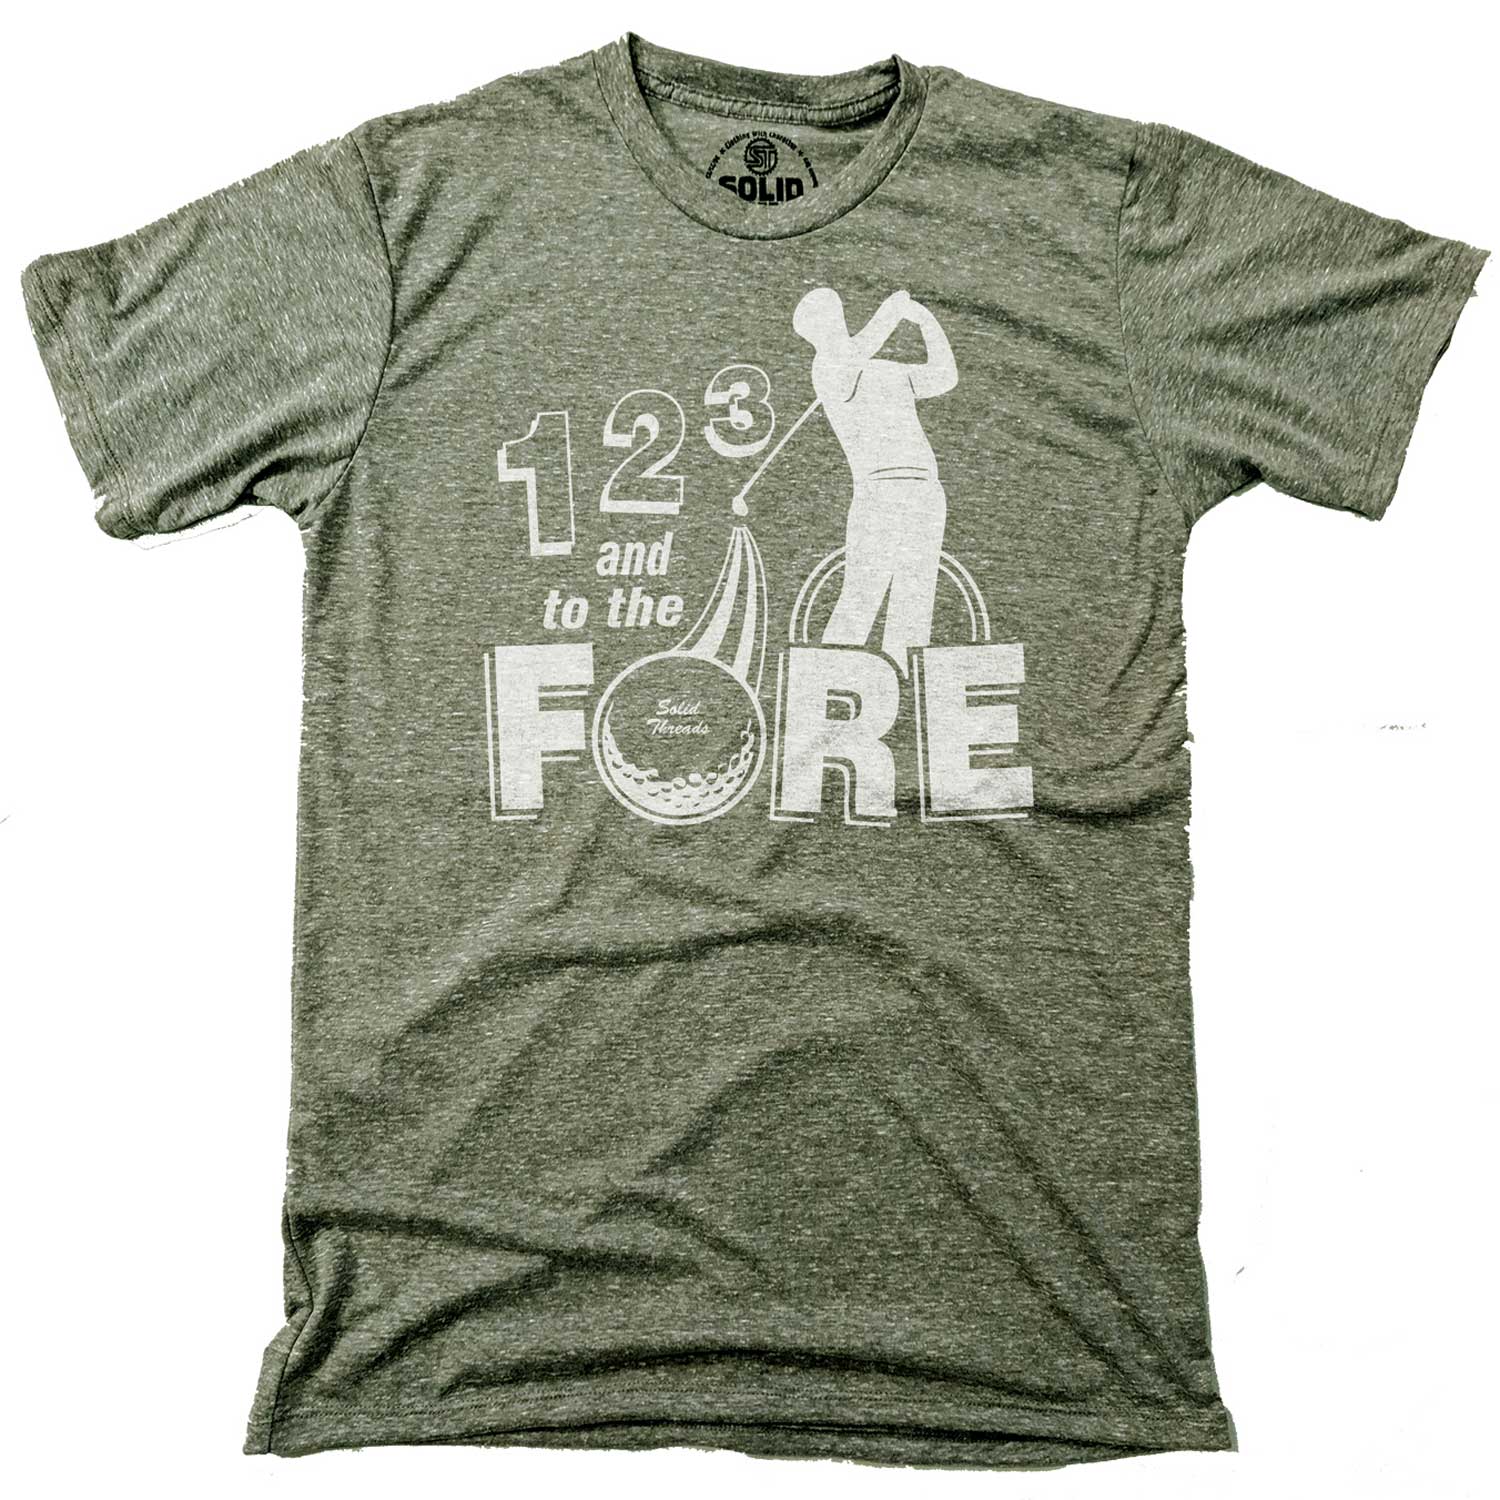 Men’s 1, 2, 3, Fore Vintage Sports Graphic Tee | Funny Golf Course T-shirt | Solid Threads